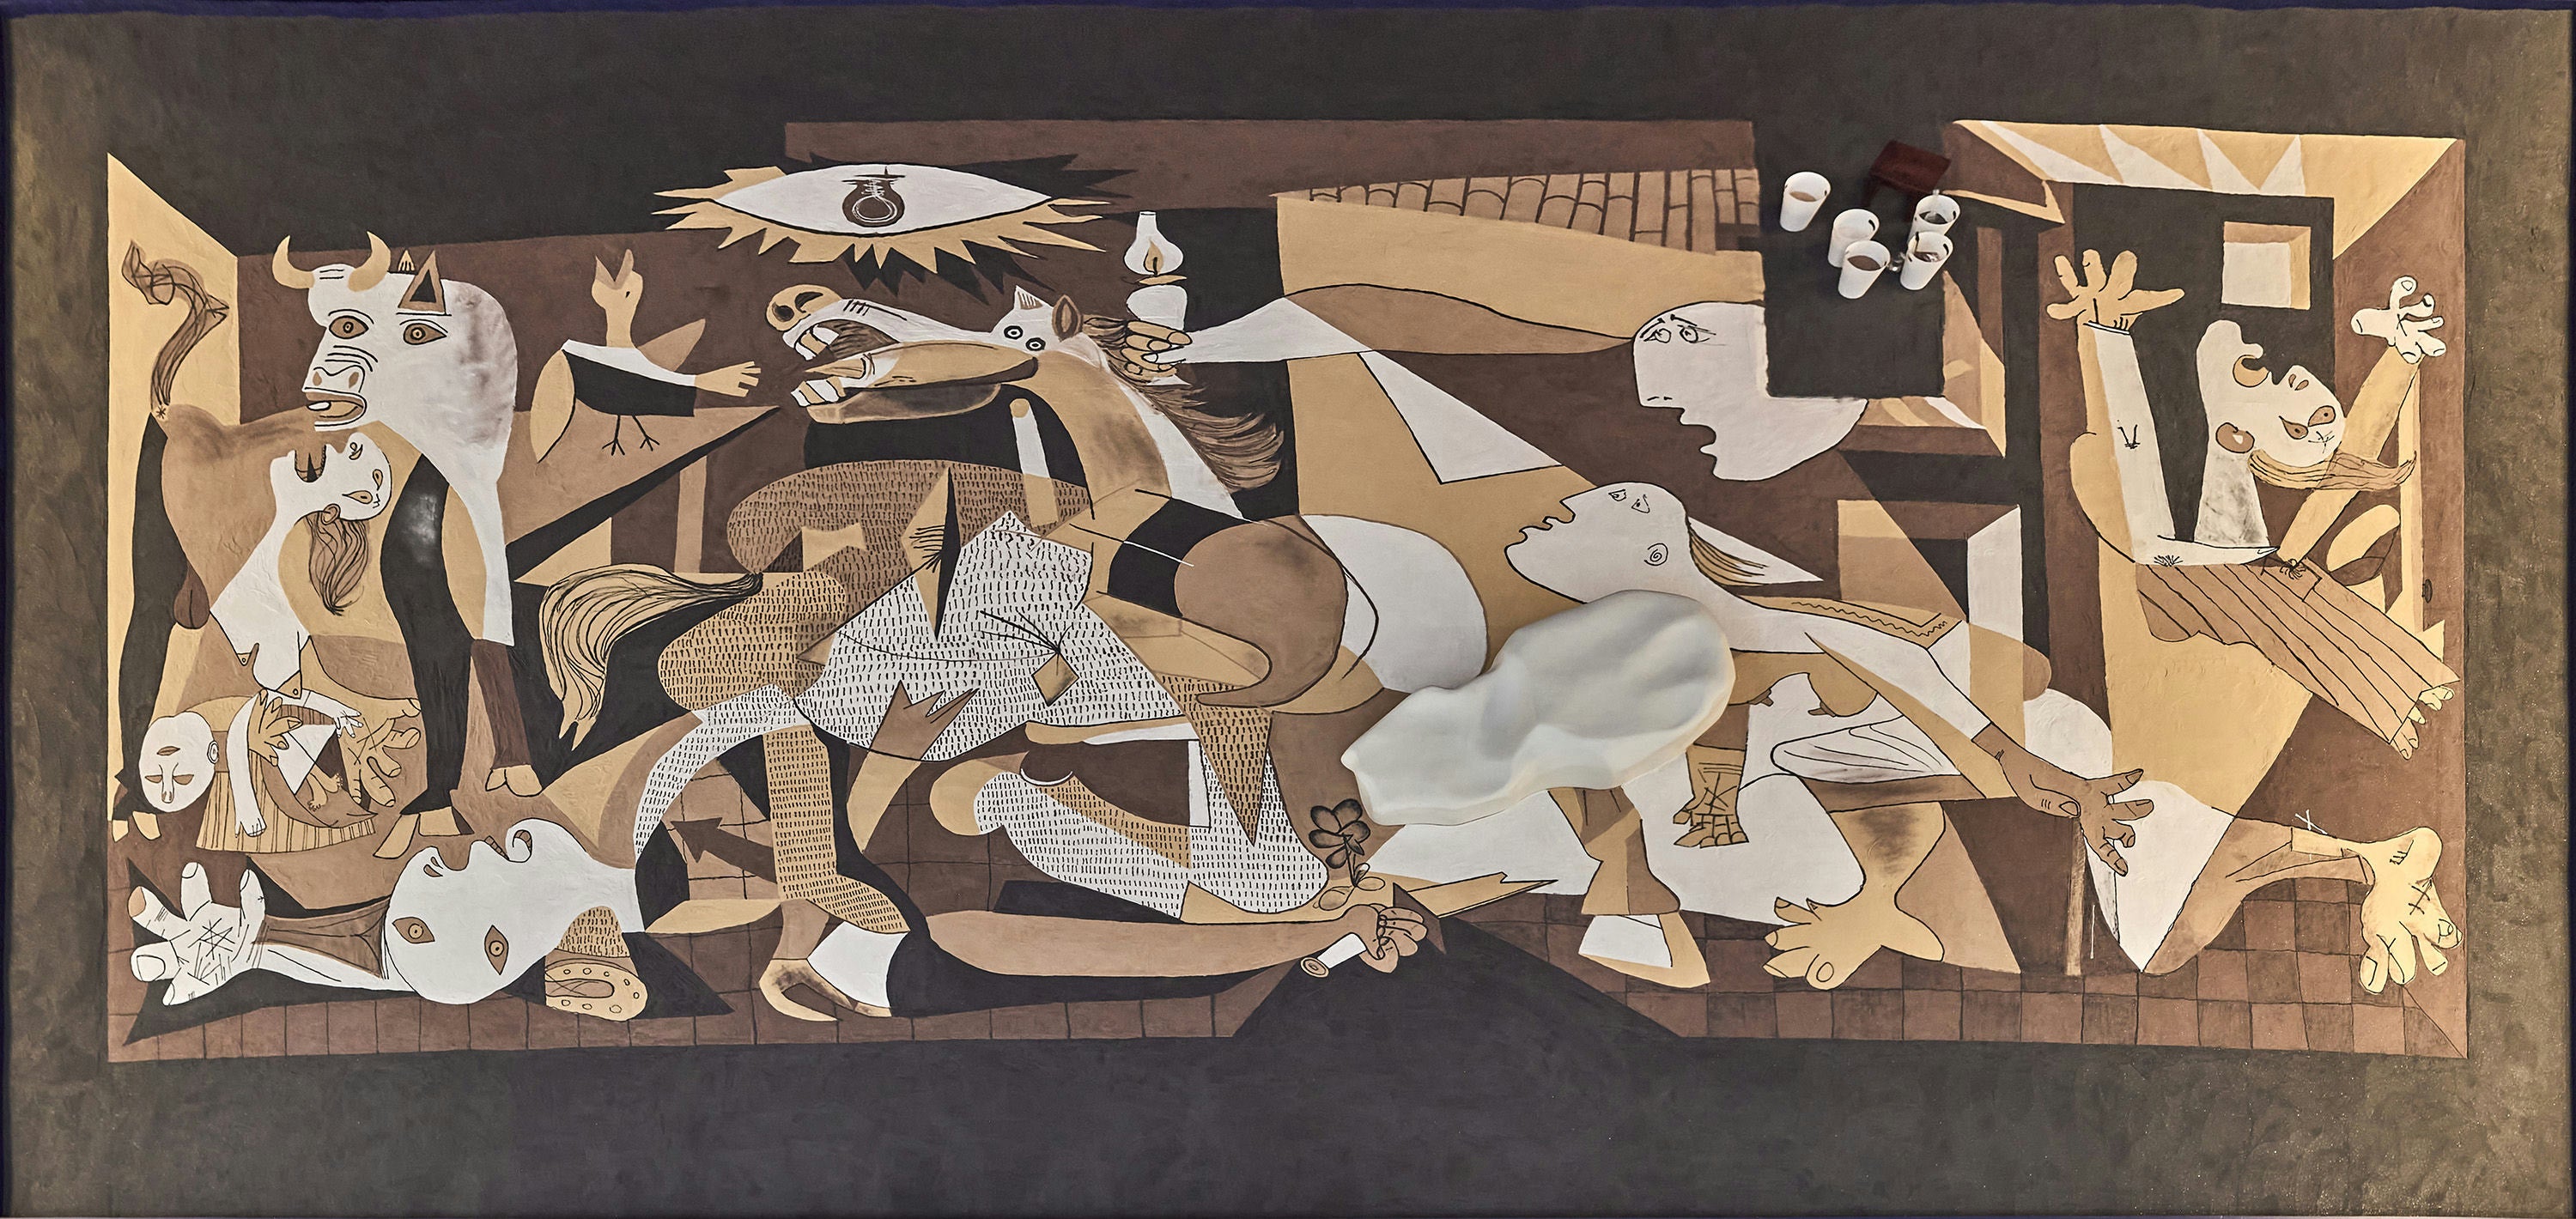 Guernica painting by Picasso recreated in sand by Lee Mingwei